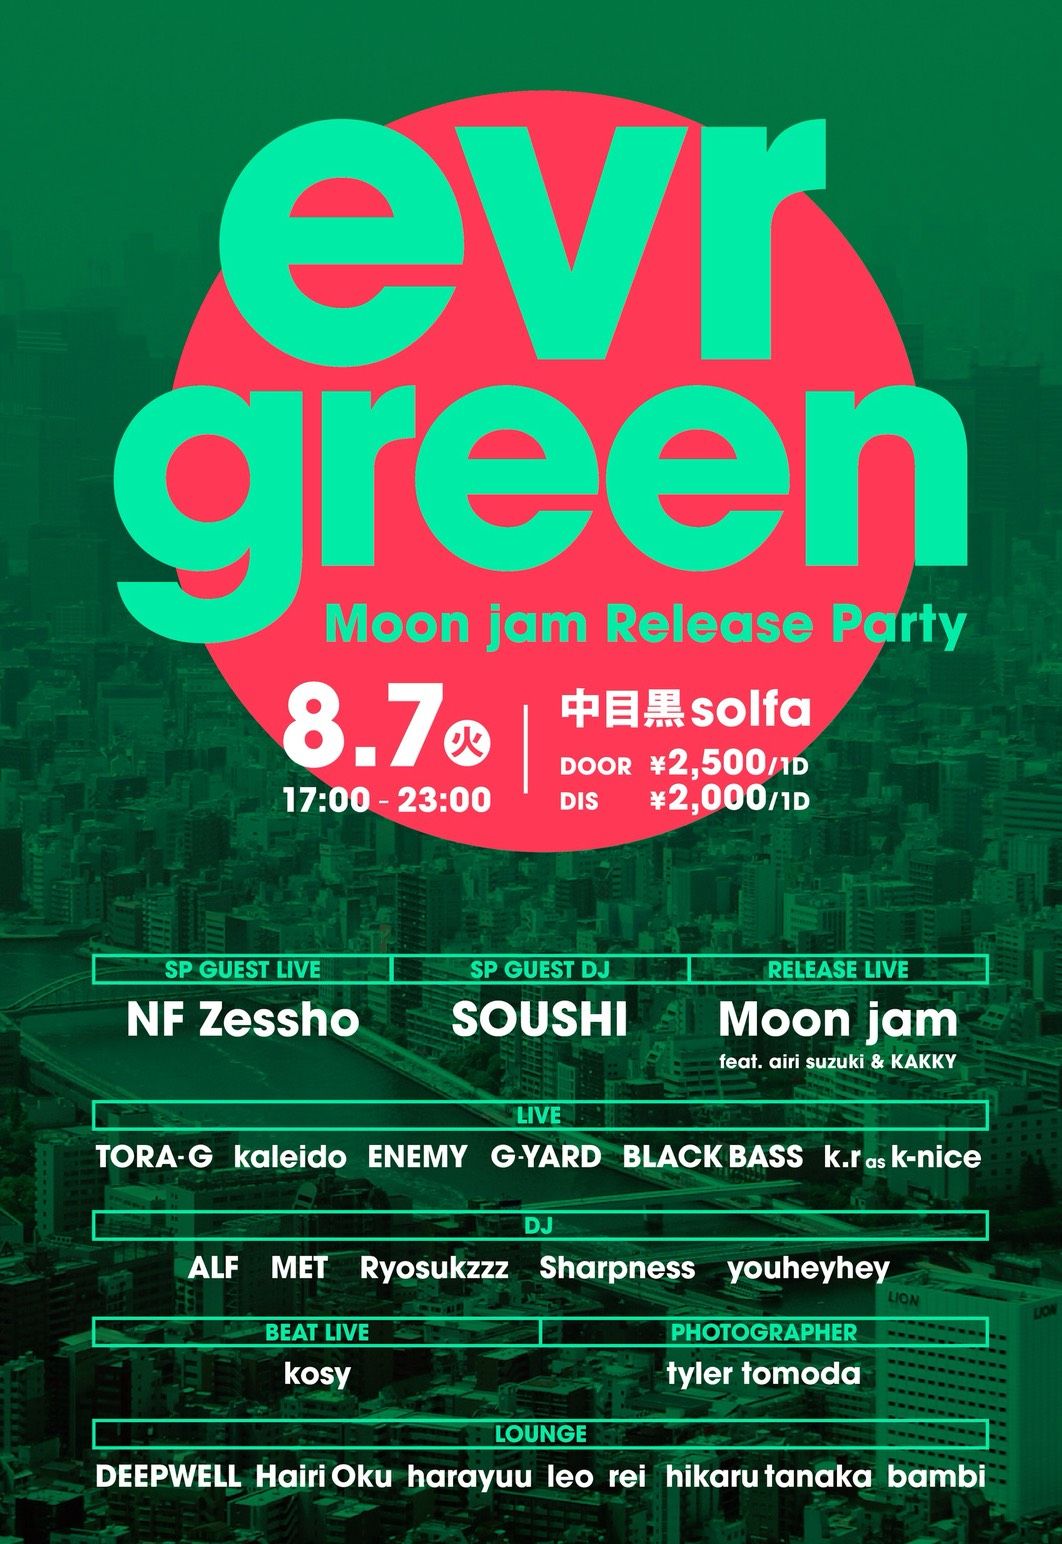 『evrgreen』 -Moon jam Release Party-